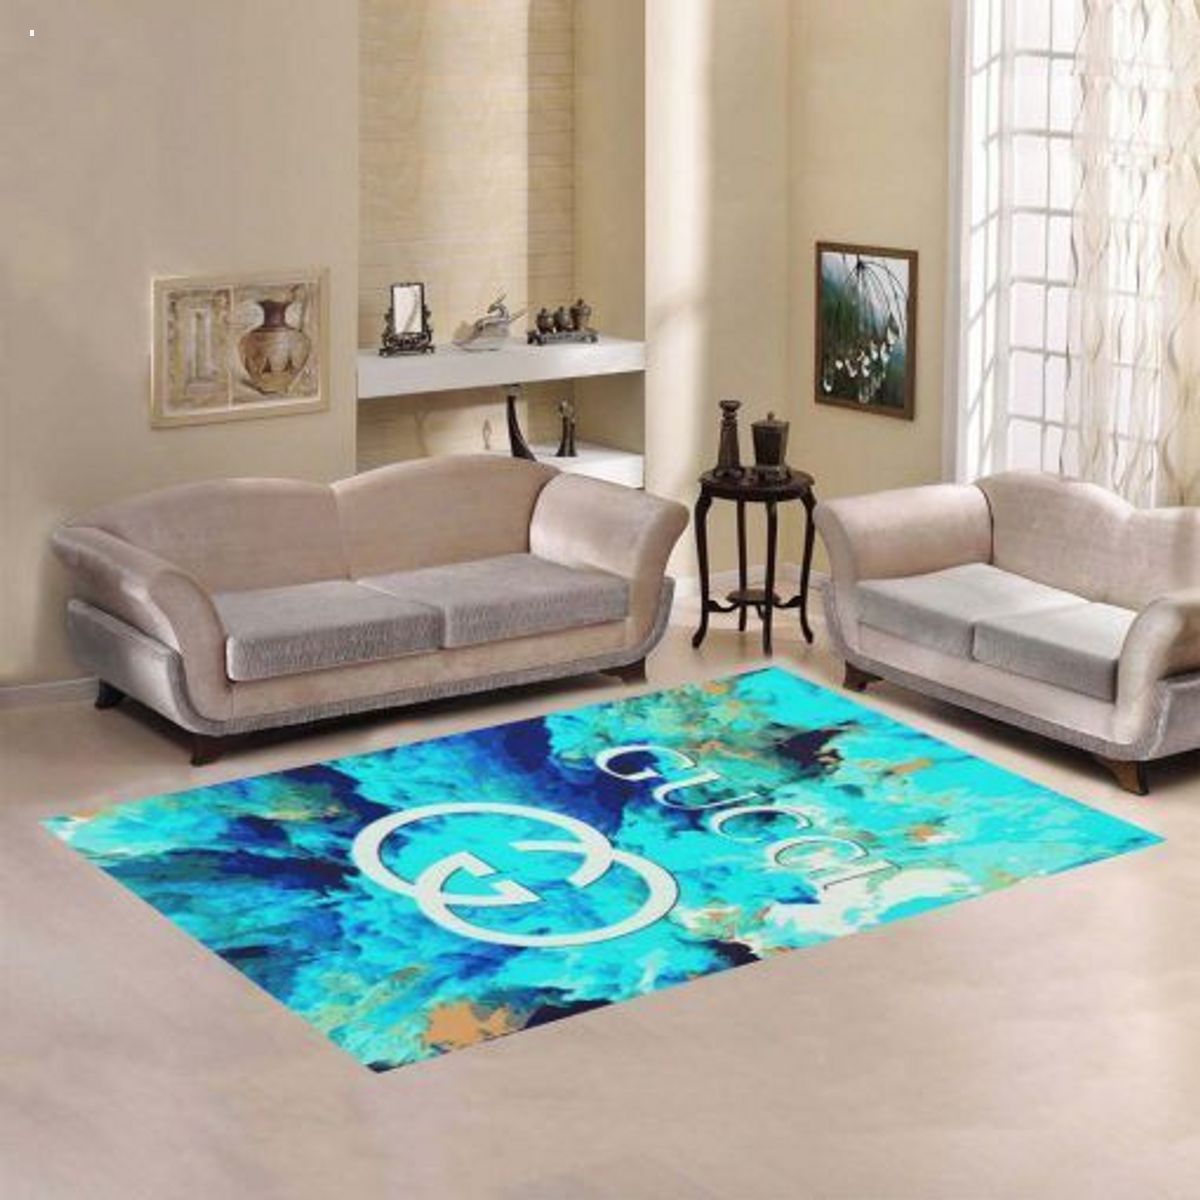 Gucci Tie Dye Blue Color For Living Room Bedroom Luxury Brand Carpet Rug Limited Edition